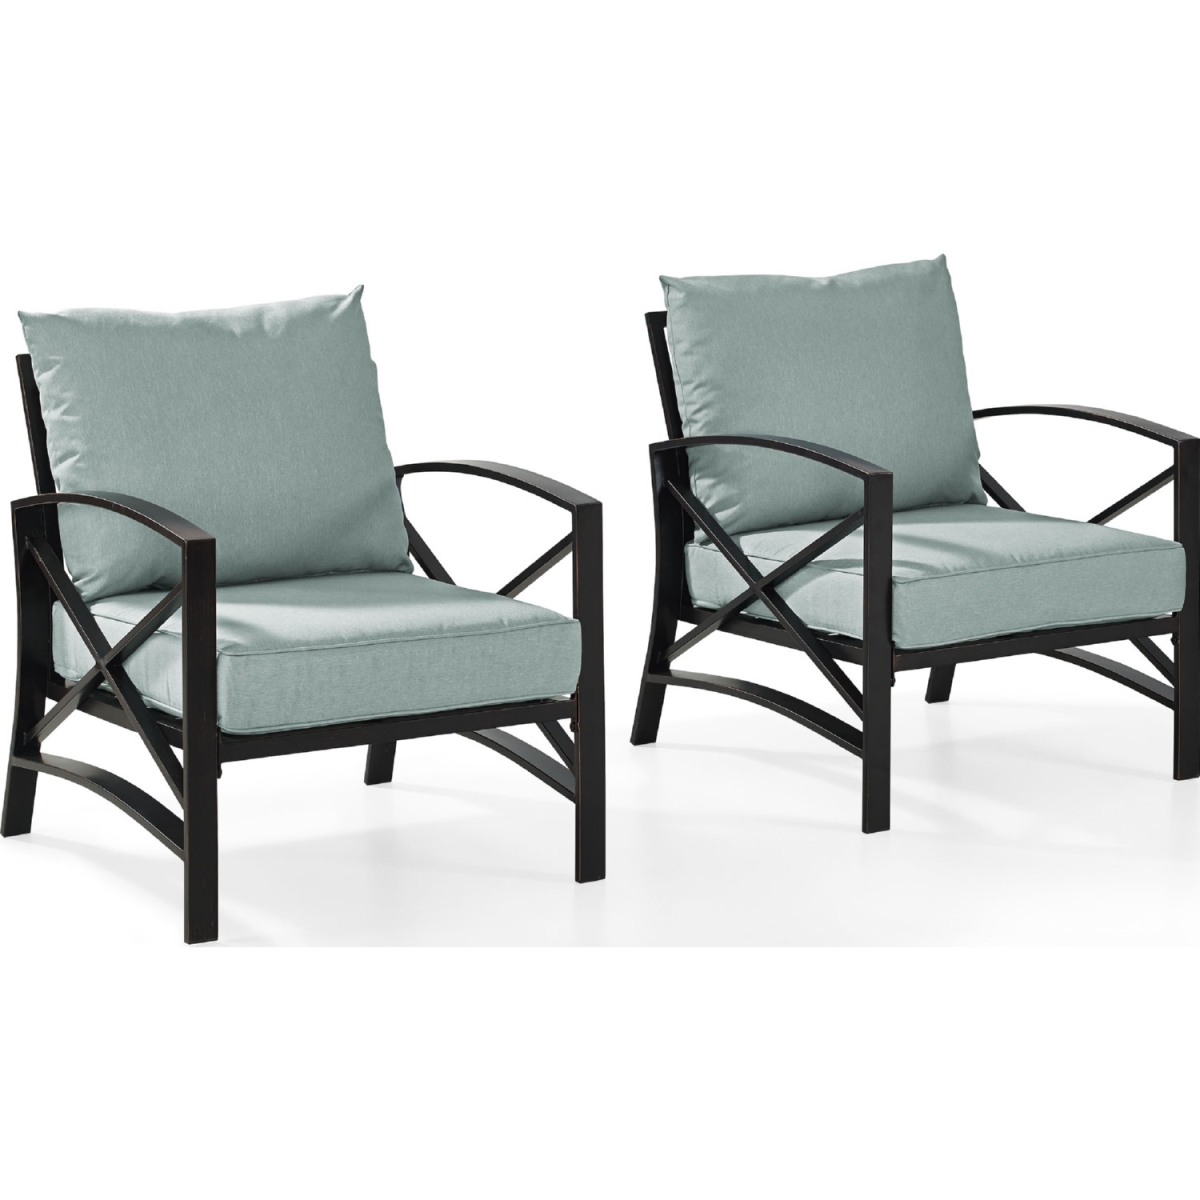 TEMPLETON 2 Piece Kaplan Outdoor Seating Set with Mist Cushion - Two Kaplan Outdoor Chairs